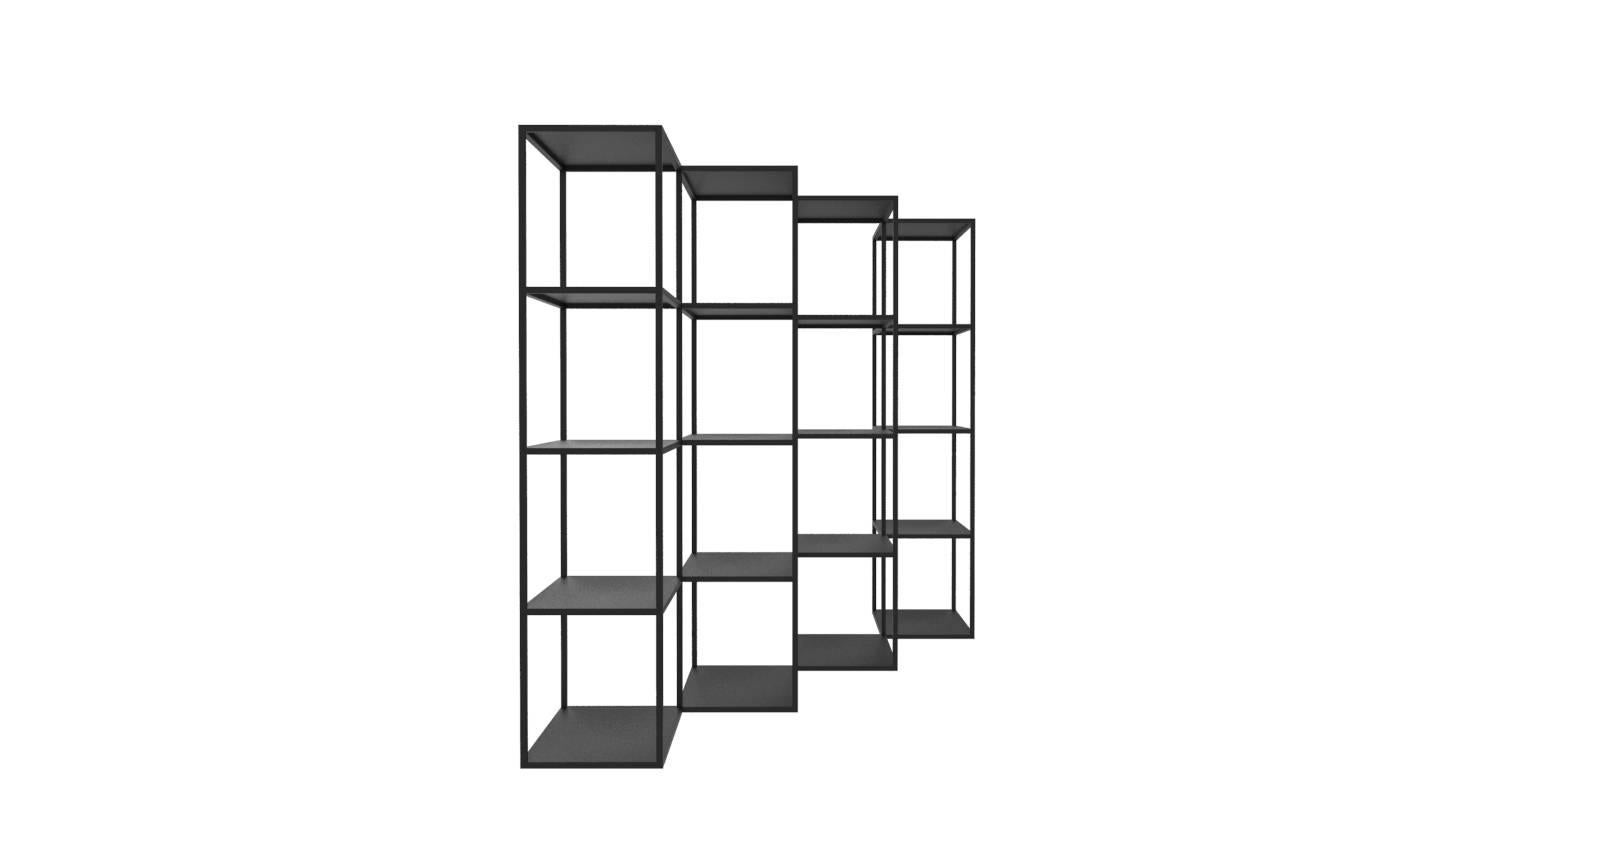 Conceived as a minimal and contemporary bookcase to breakup the plane of the wall, this modular system, is versatile as a modern room divider as well as a backdrop in any space, be it a residence or office space. This system begins with a minimum of